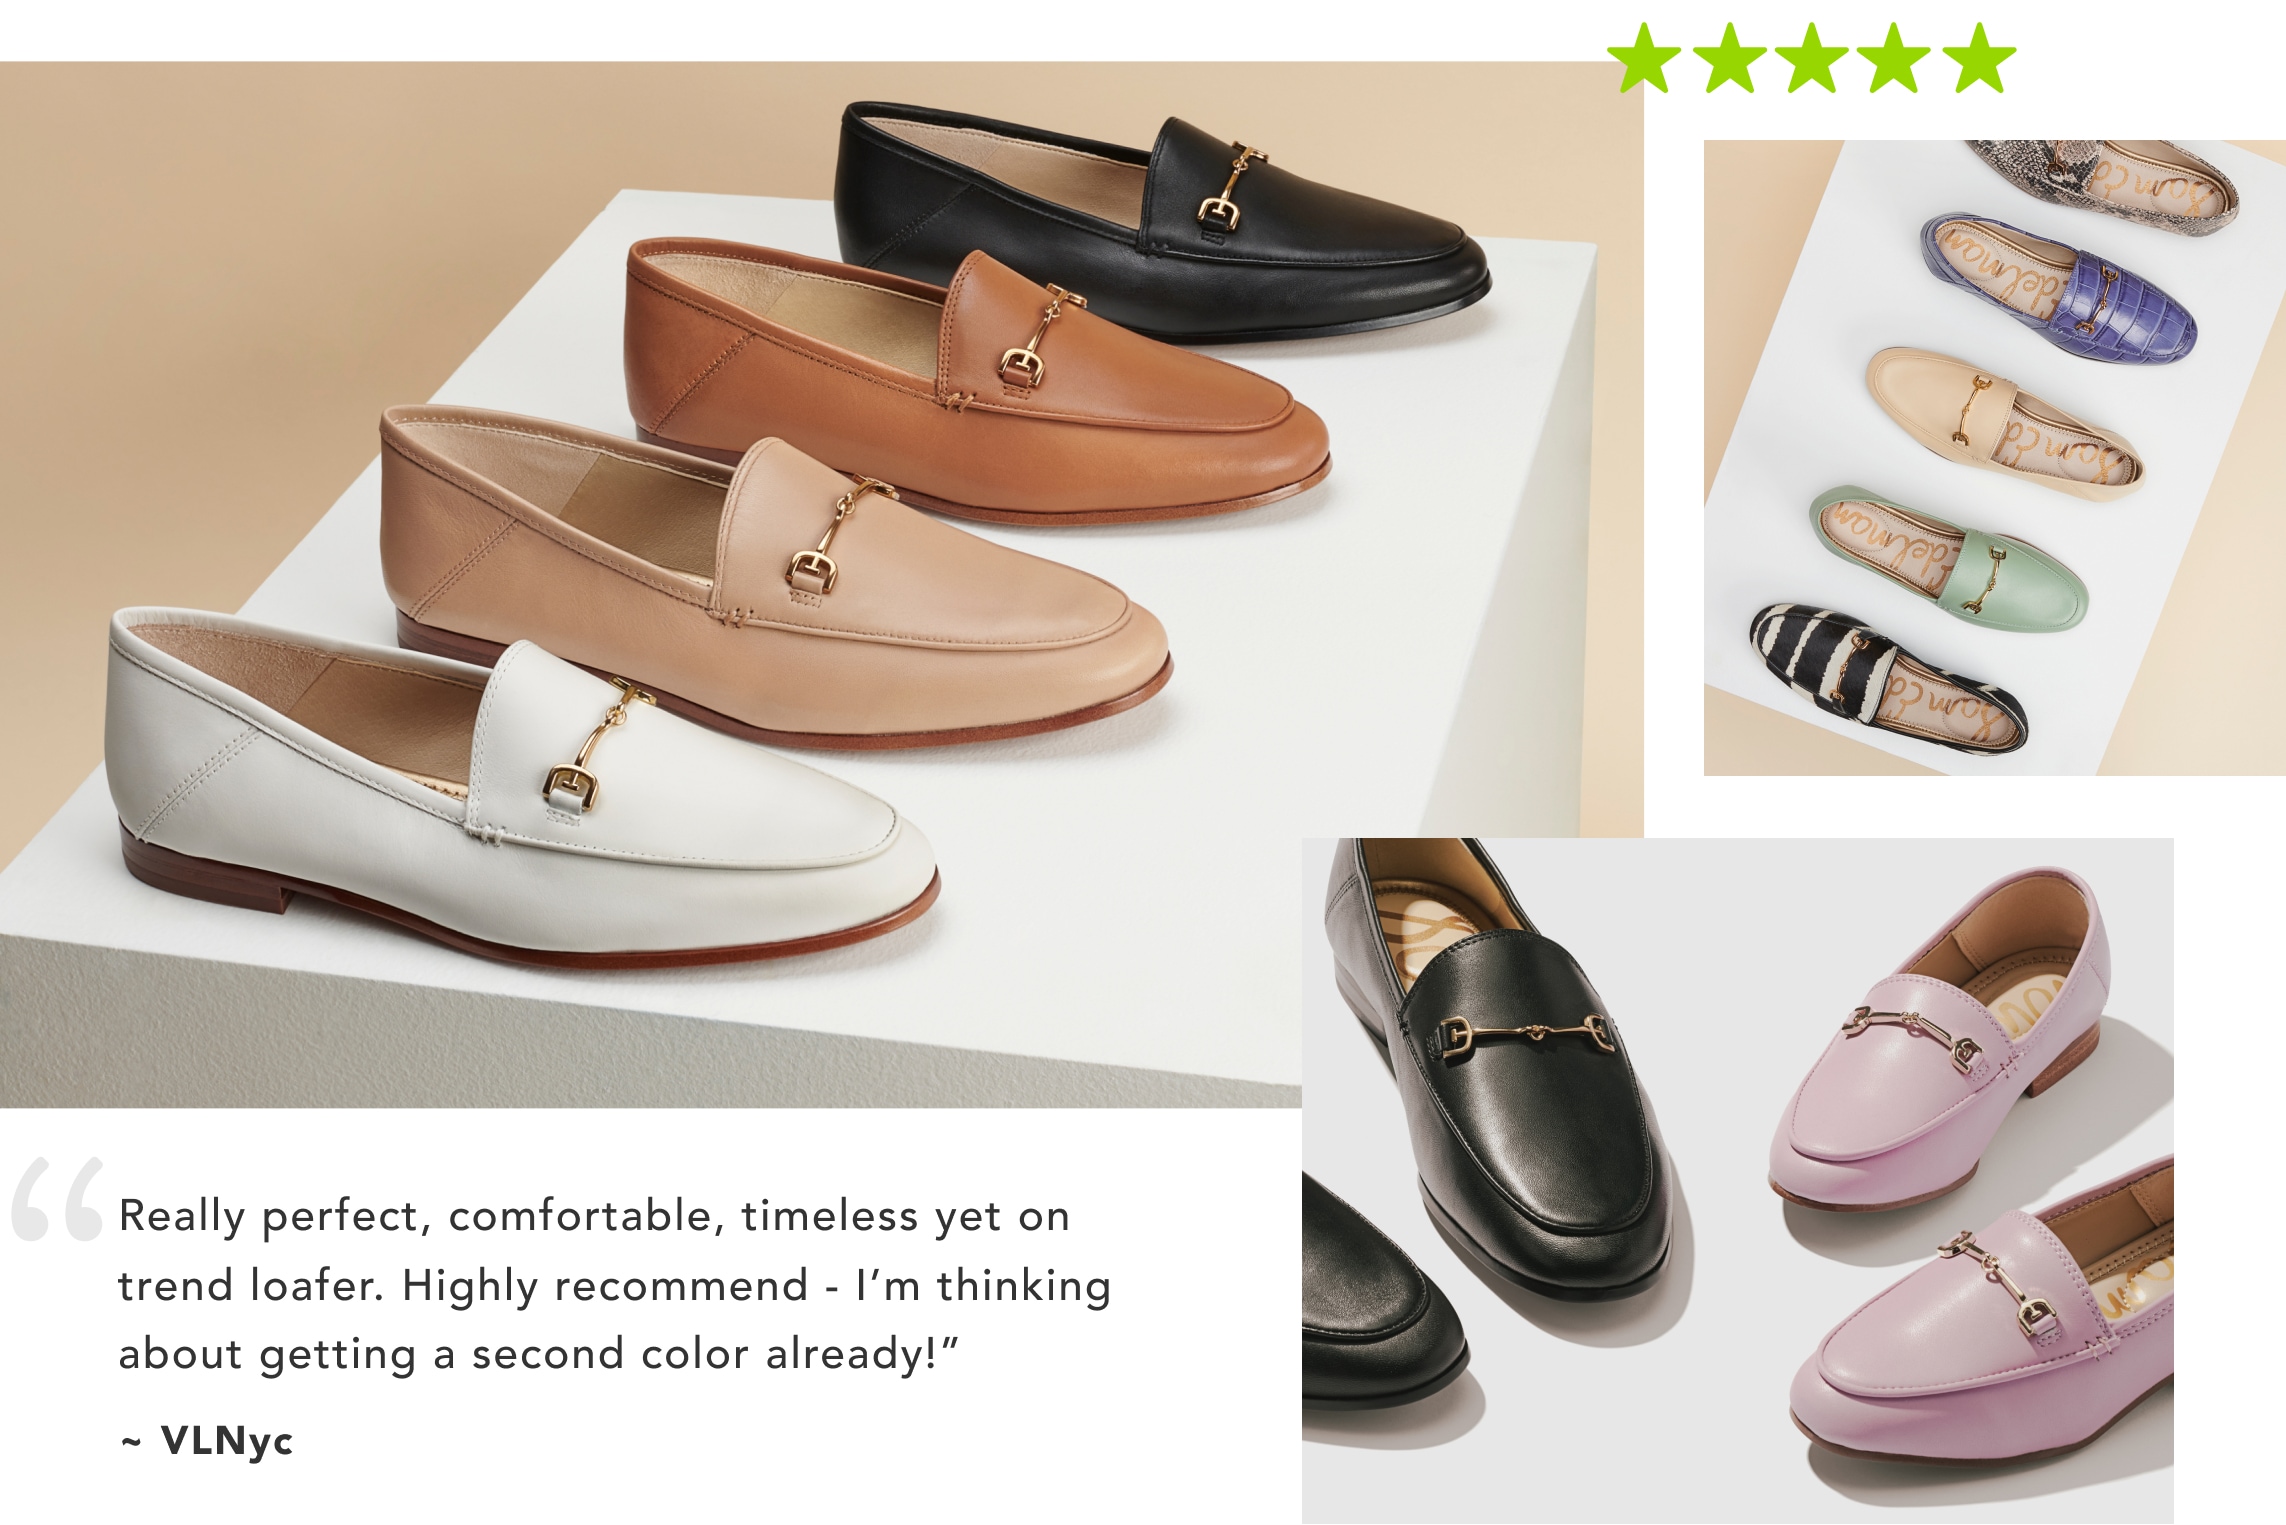 The Iconic Loraine Loafer